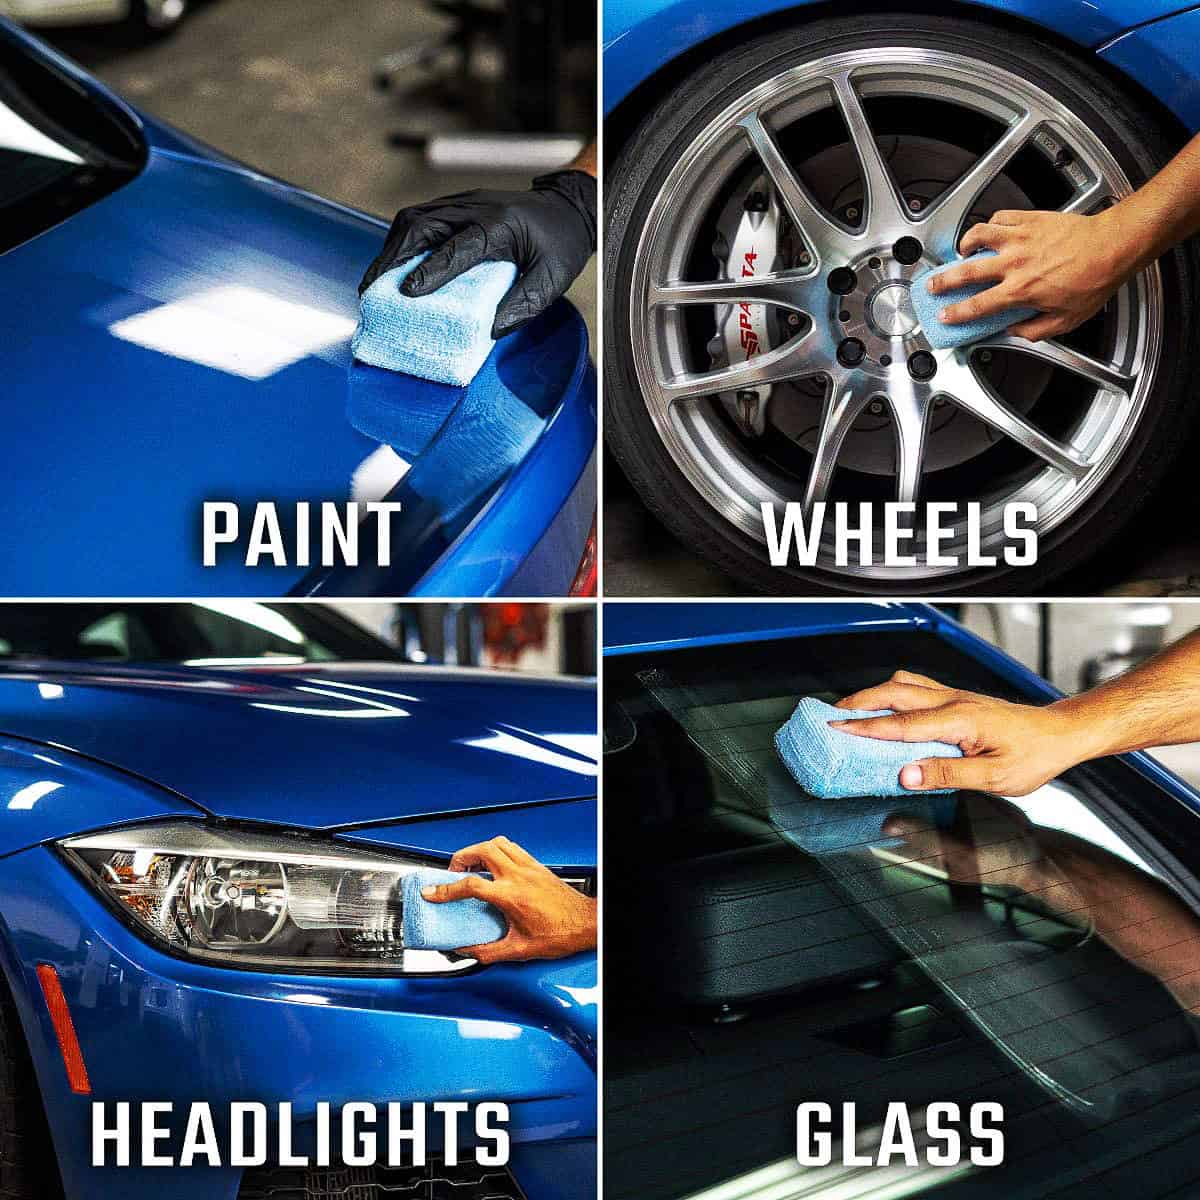 Chemical Guys Hydro Slick Ceramic Coating Hyperwax: Get the deepest shine without wax! All surfaces